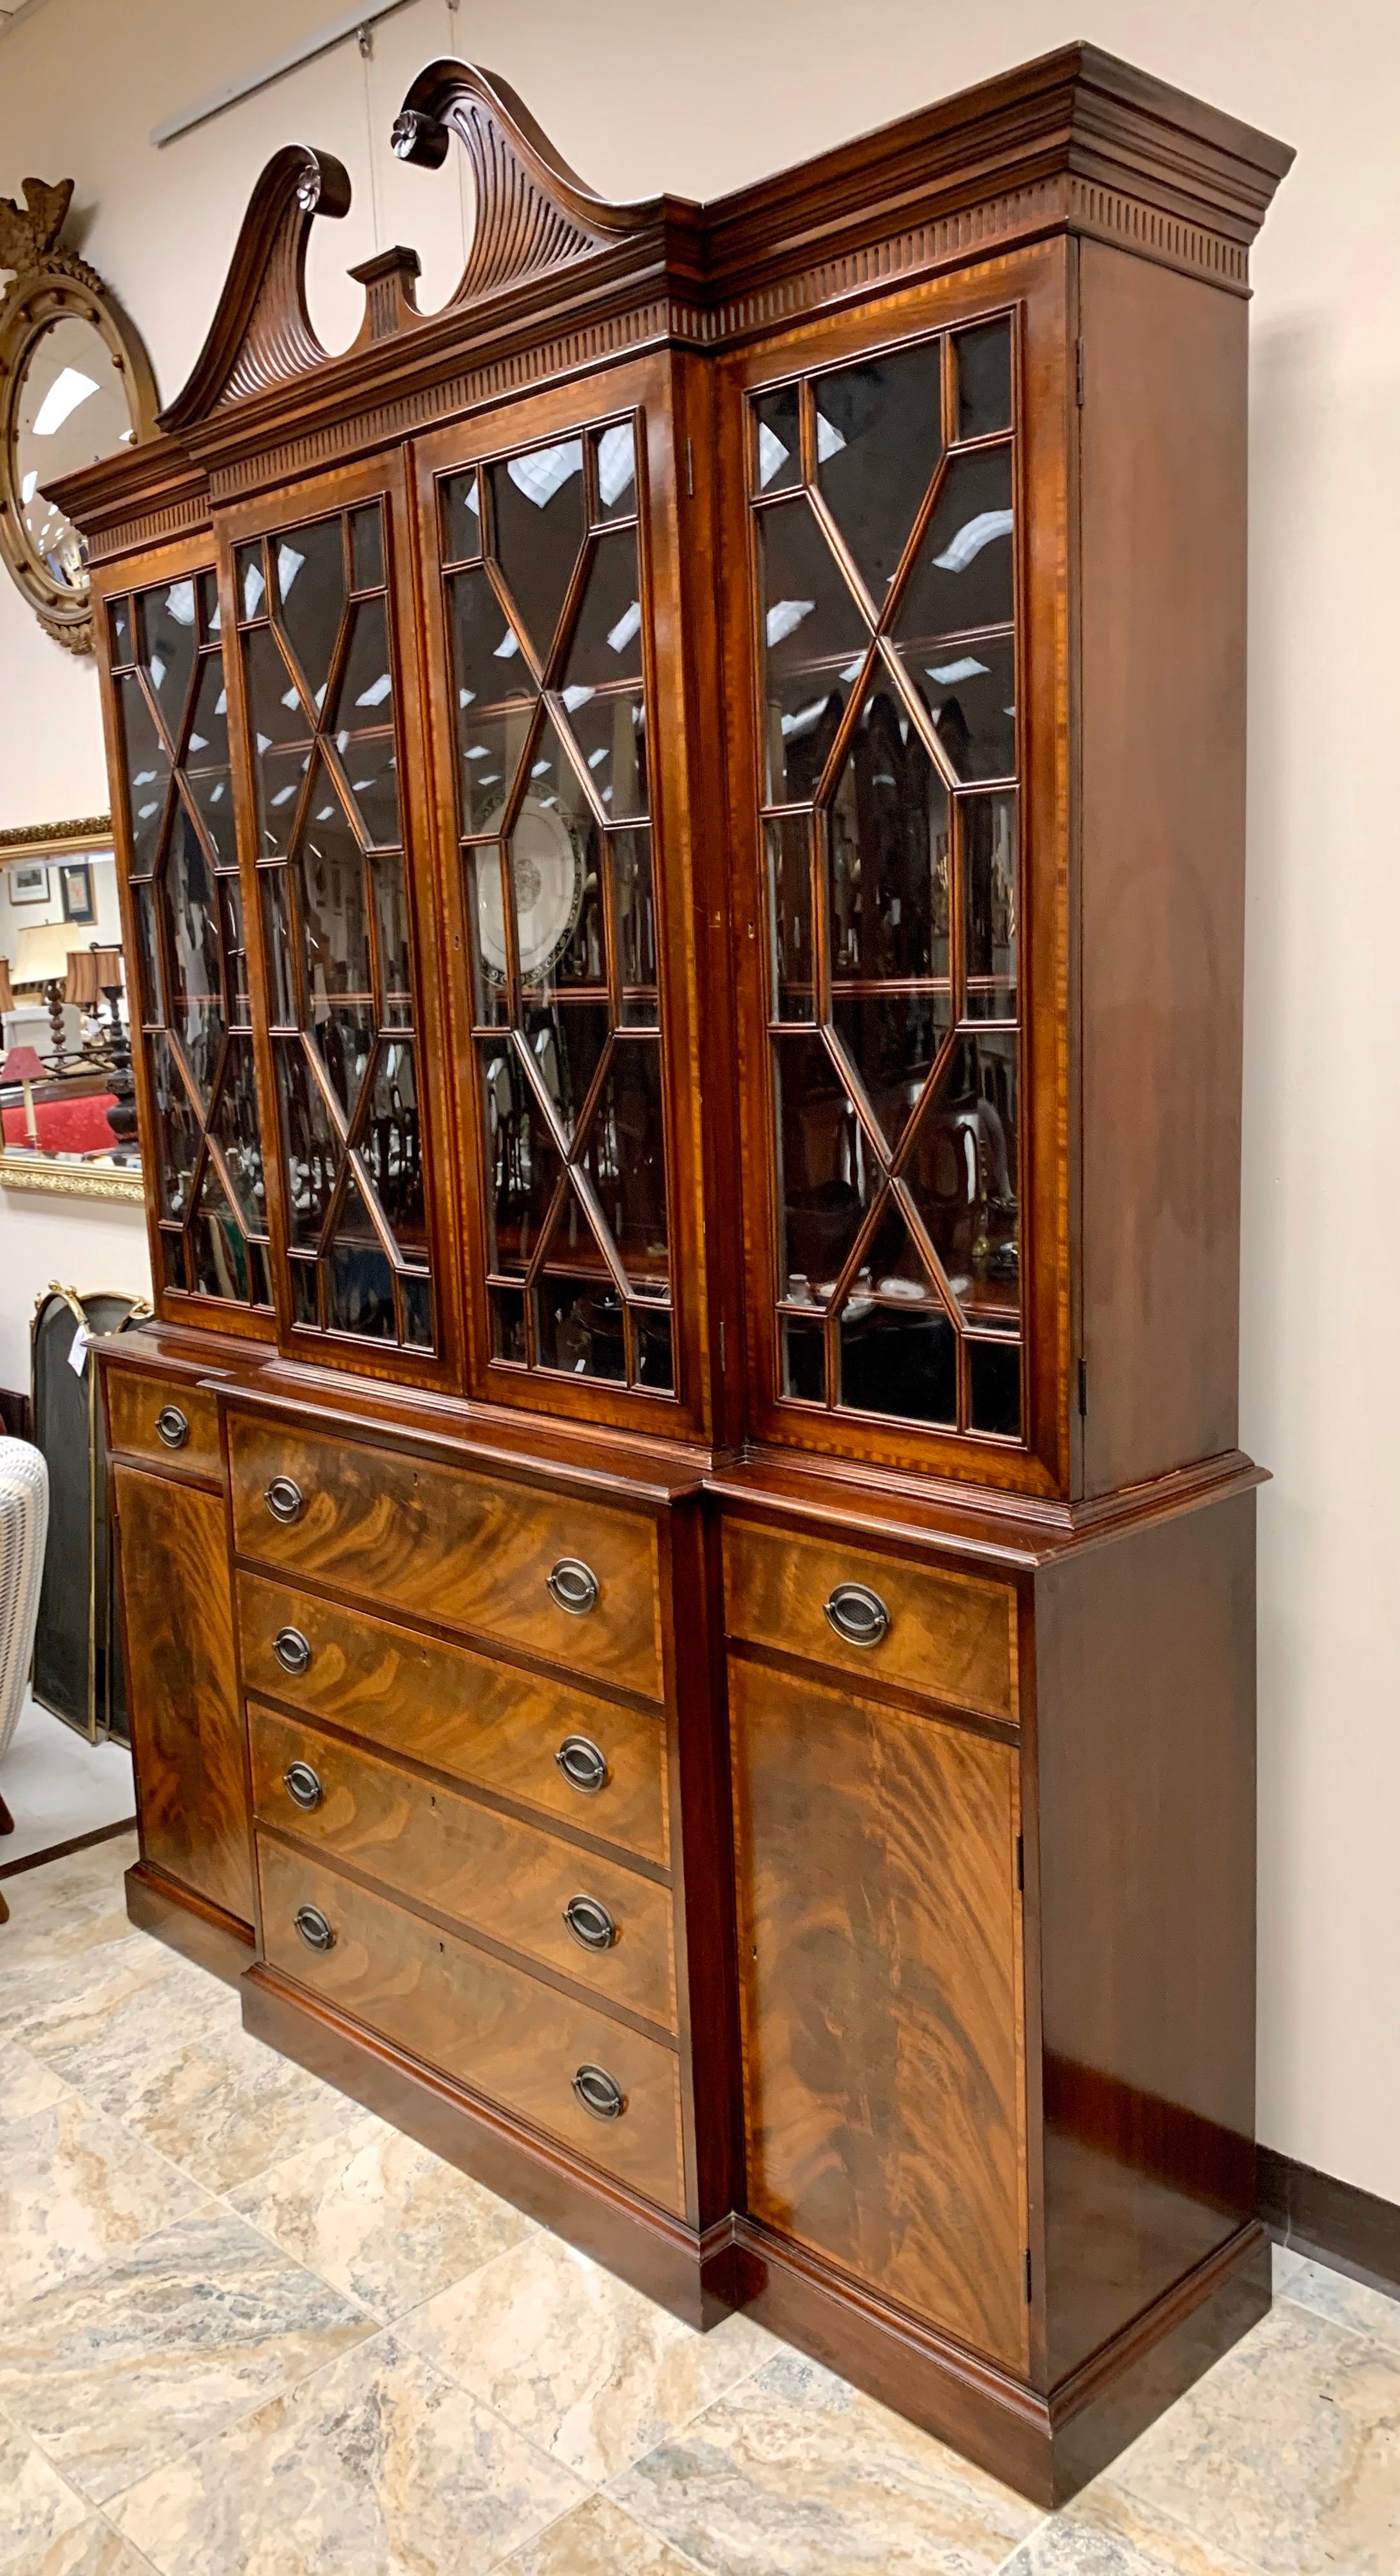 Beacon Hill collection Chippendale style 2 pc china cabinet. This flame mahogany constructed cabinet displays a broken pediment with floret accents, and four glass paneled doors just below opening to three shelves apiece. Each shelf has grooves to